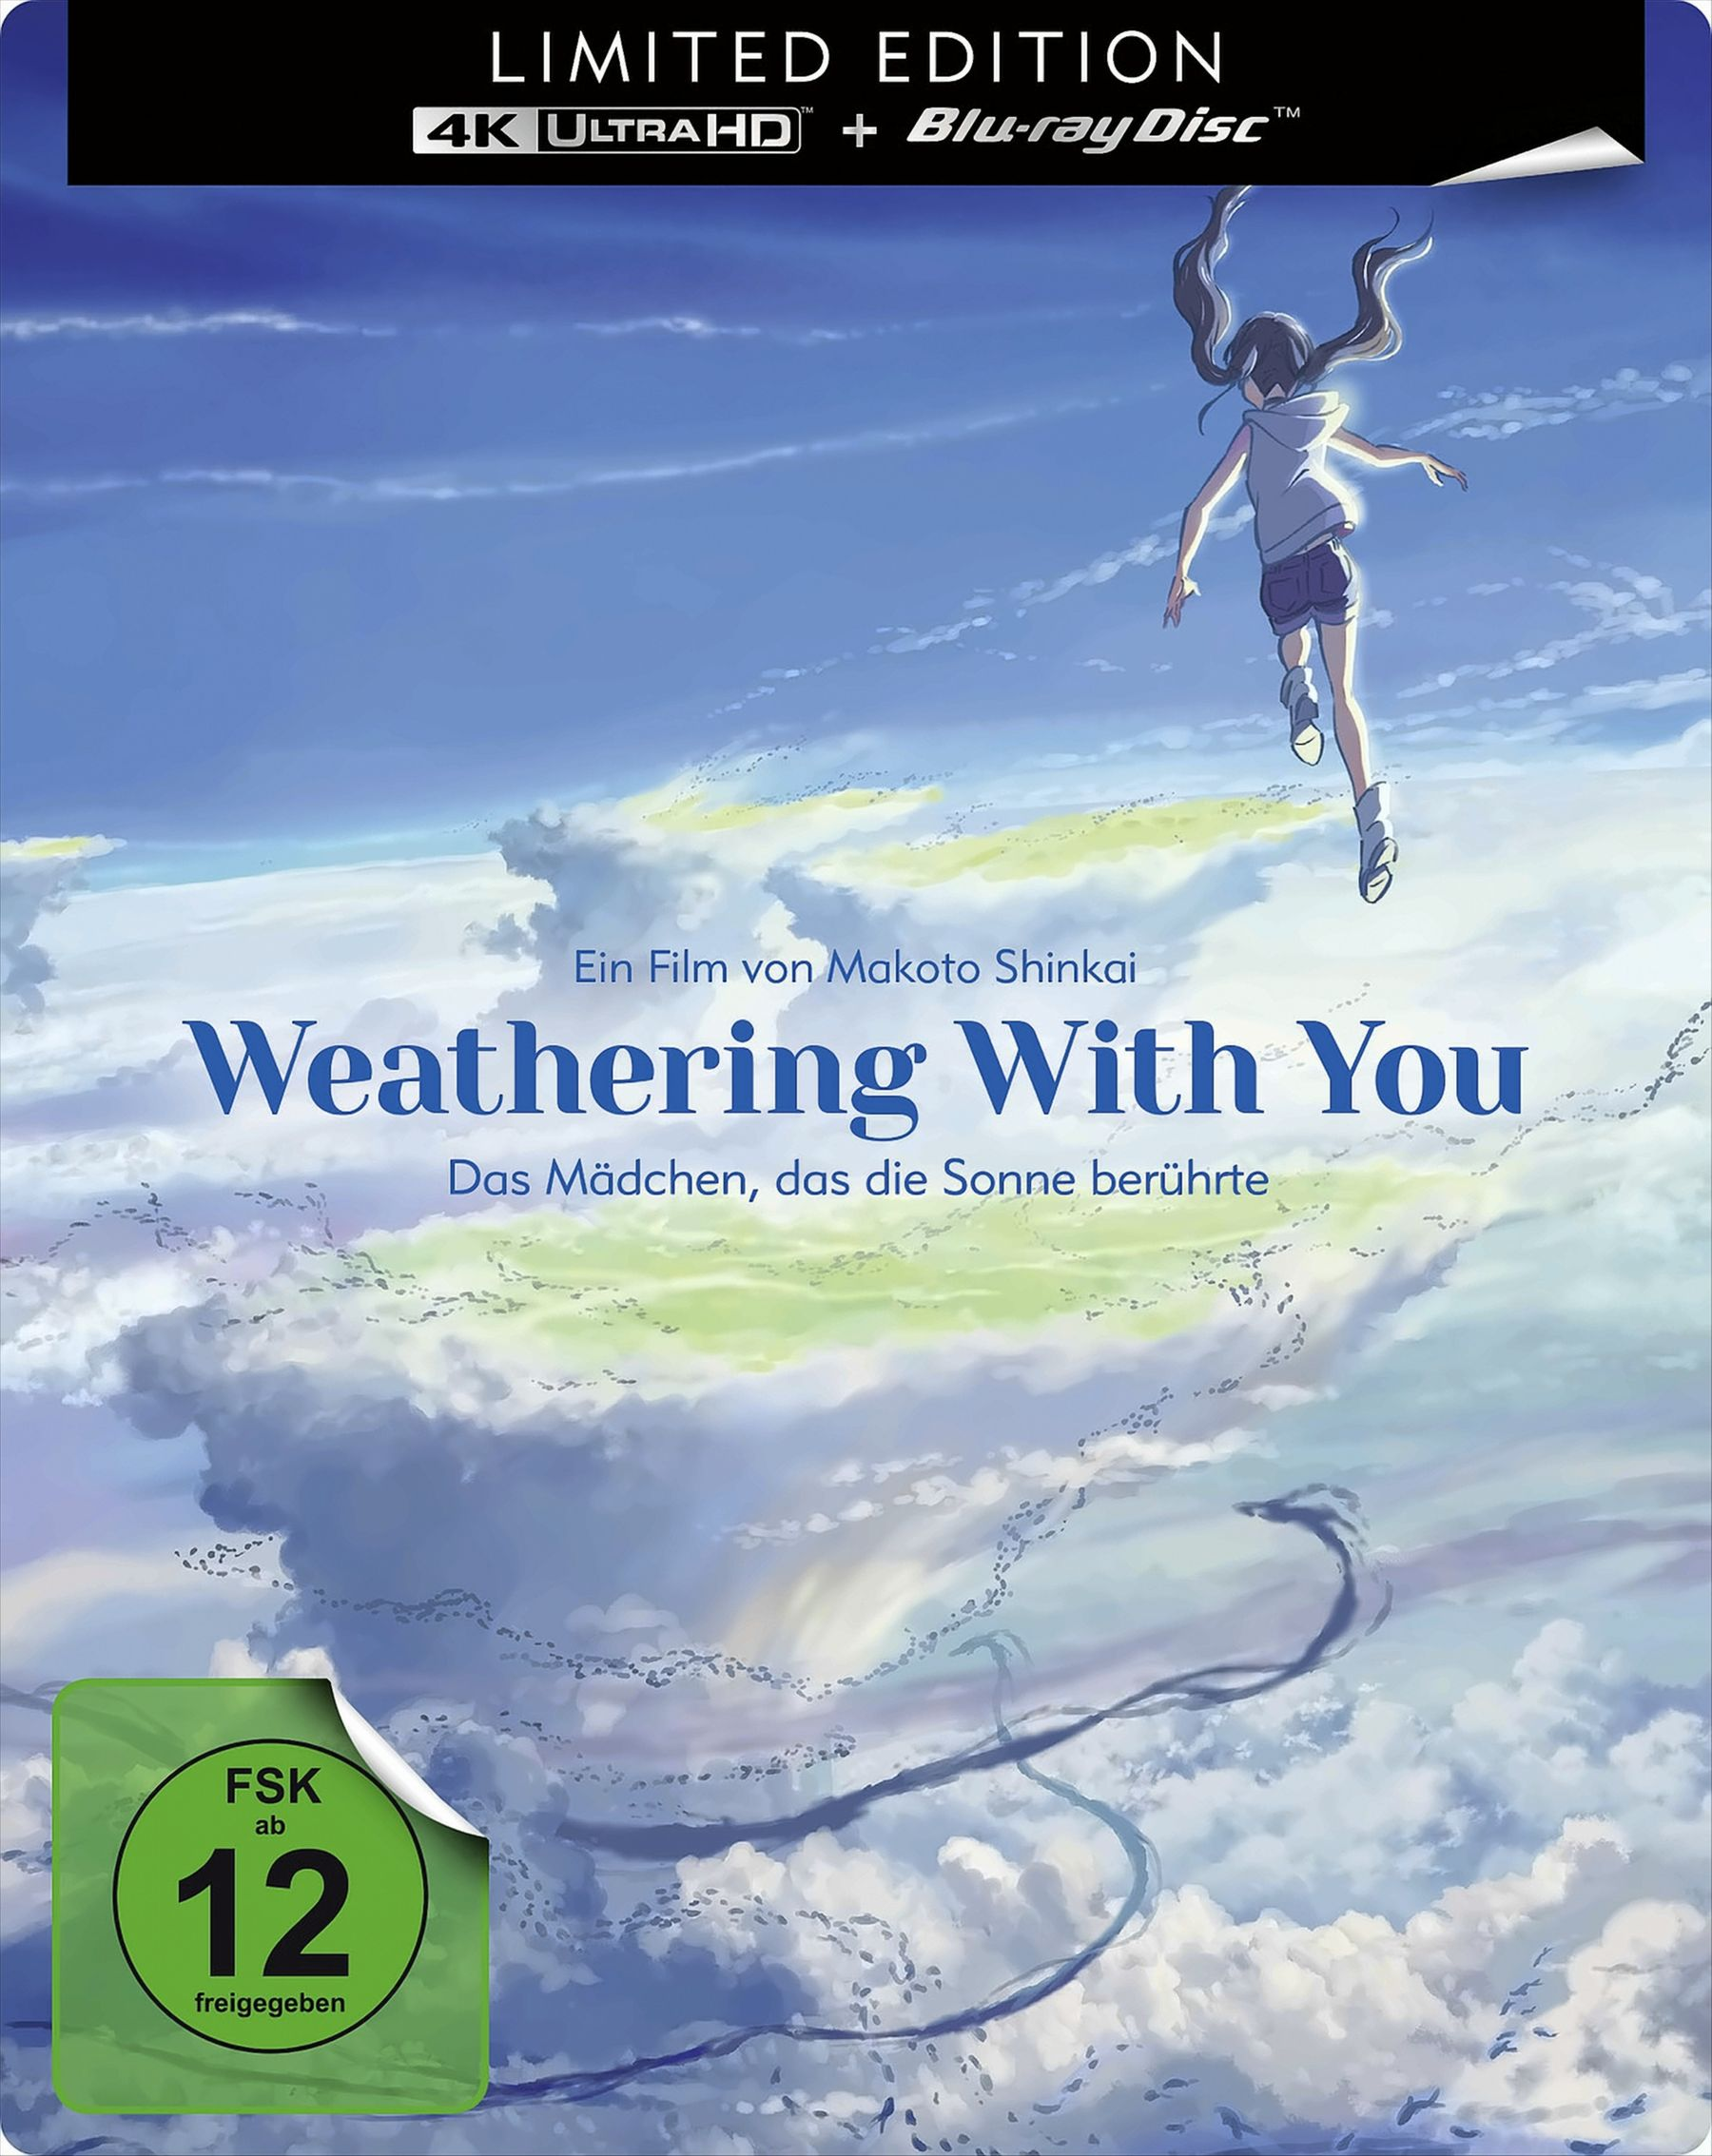 (4K With Weathering Edition] [Blu-ray] [Limited - Blu-ray (Steelbook) UHD) You